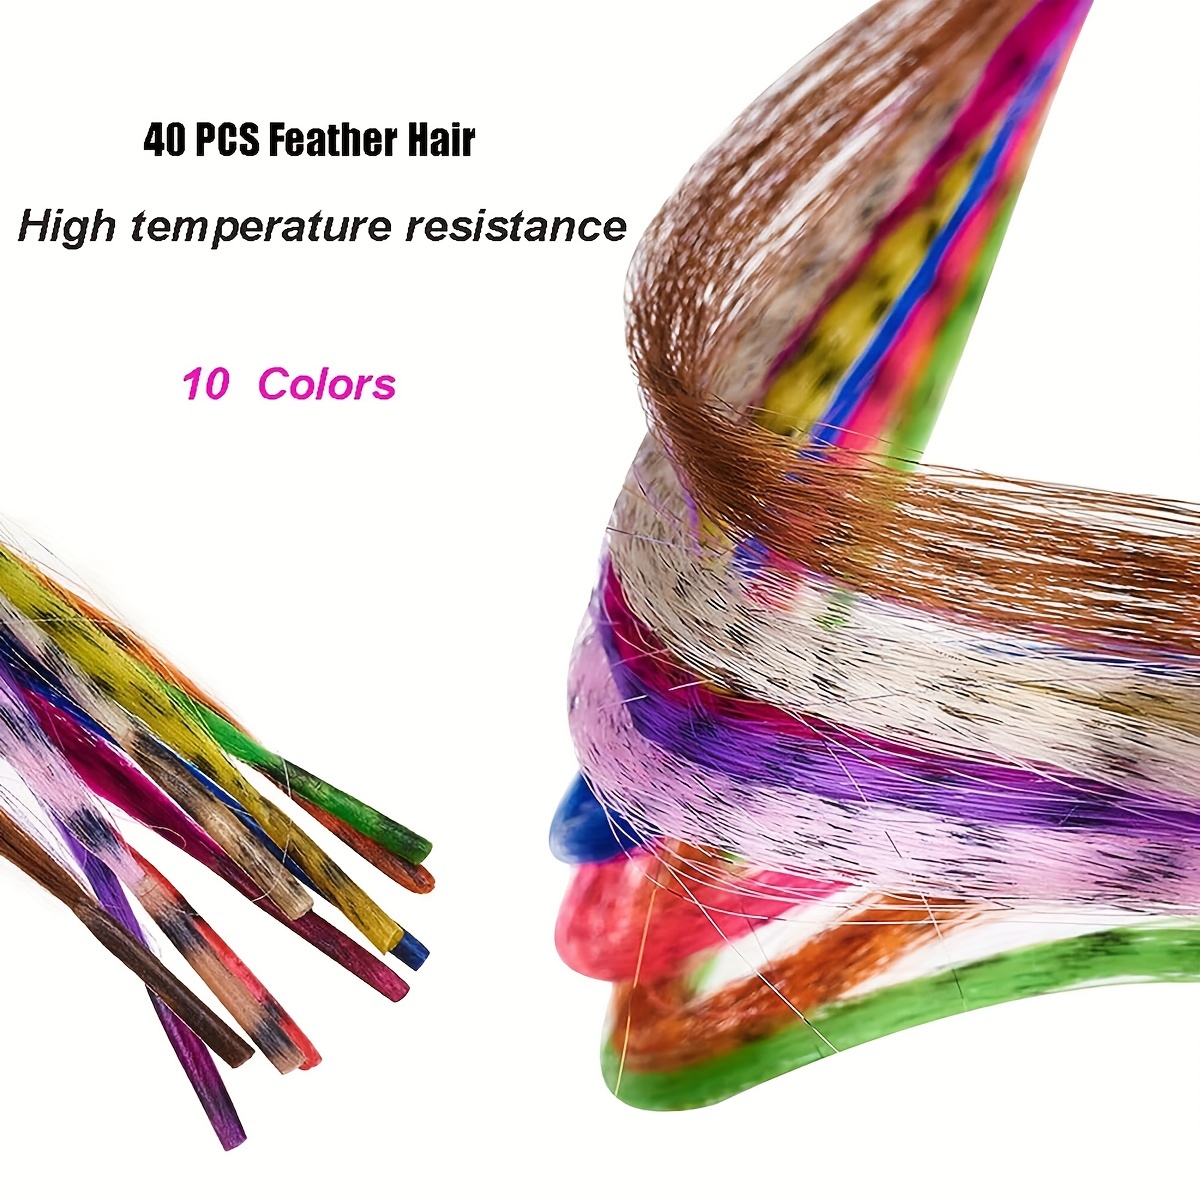 40 Strands Feather Hair Extensions, Human Hair Extensions 10 Colors 16 inch 40 Strands Hair Feathers Mixed Colors Colored Synthetic Hair Feathers